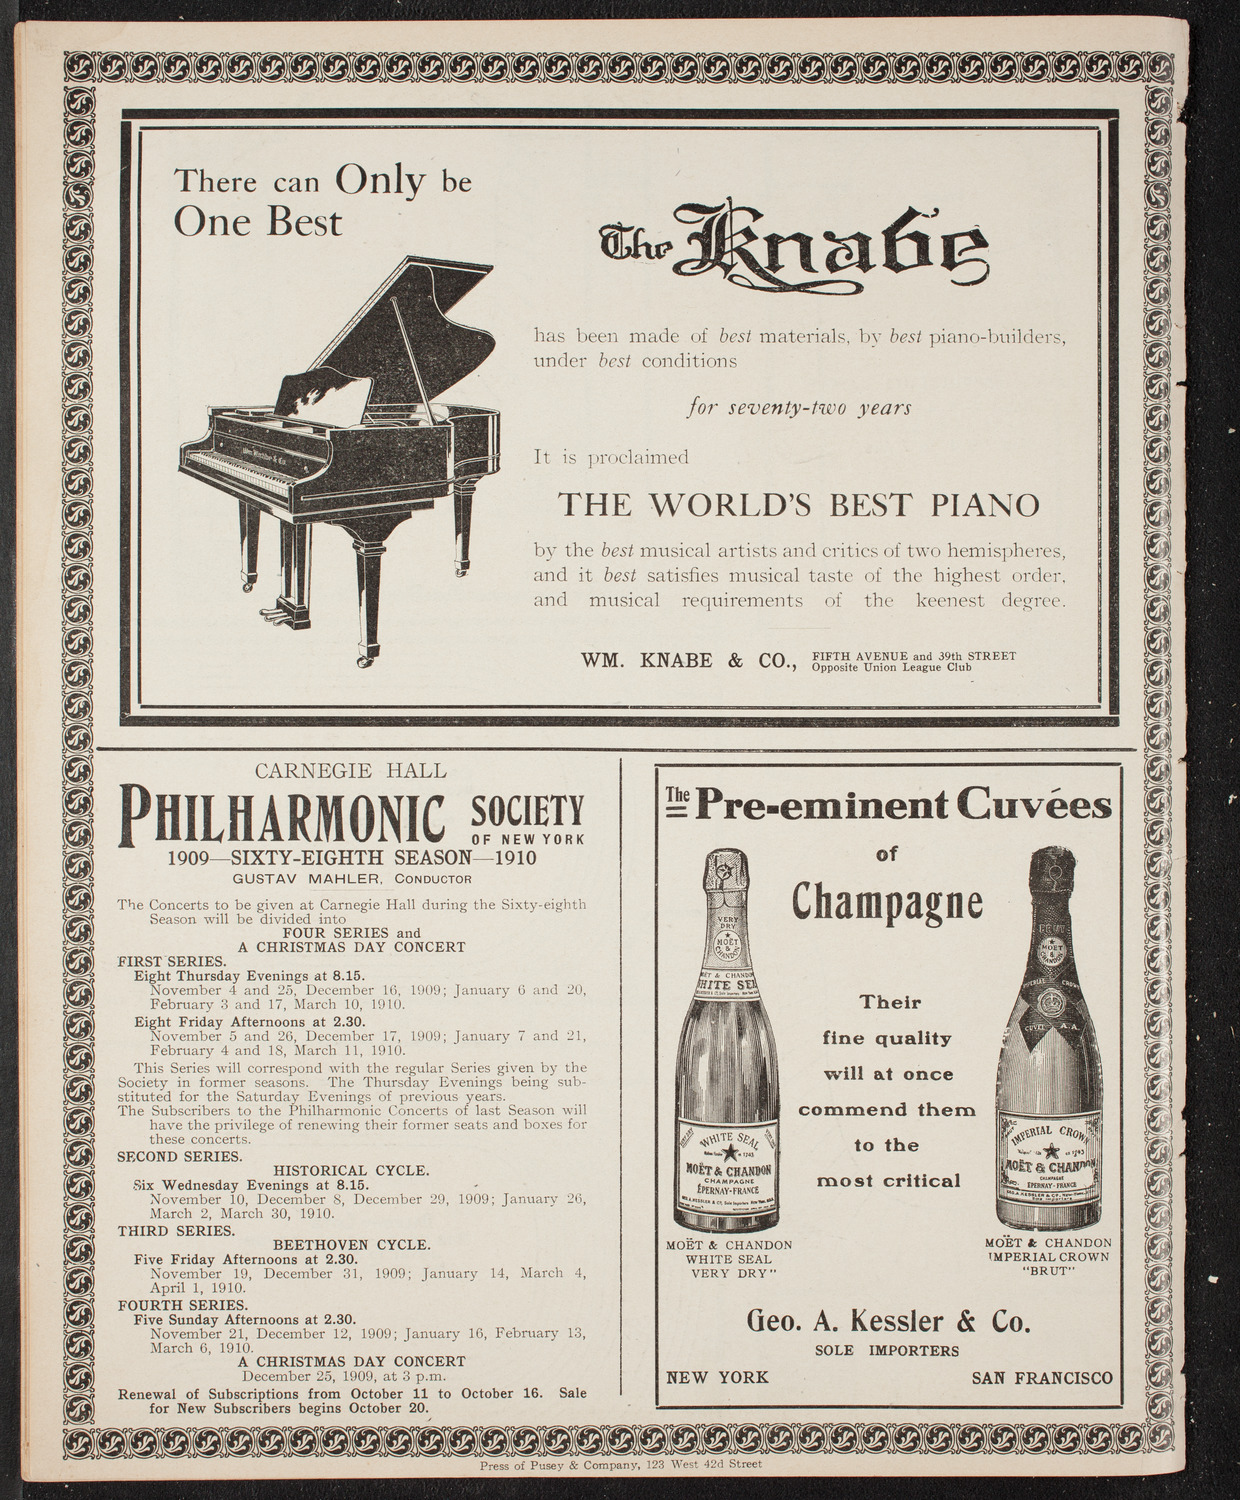 Lecture by R.G. Knowles, October 31, 1909, program page 12